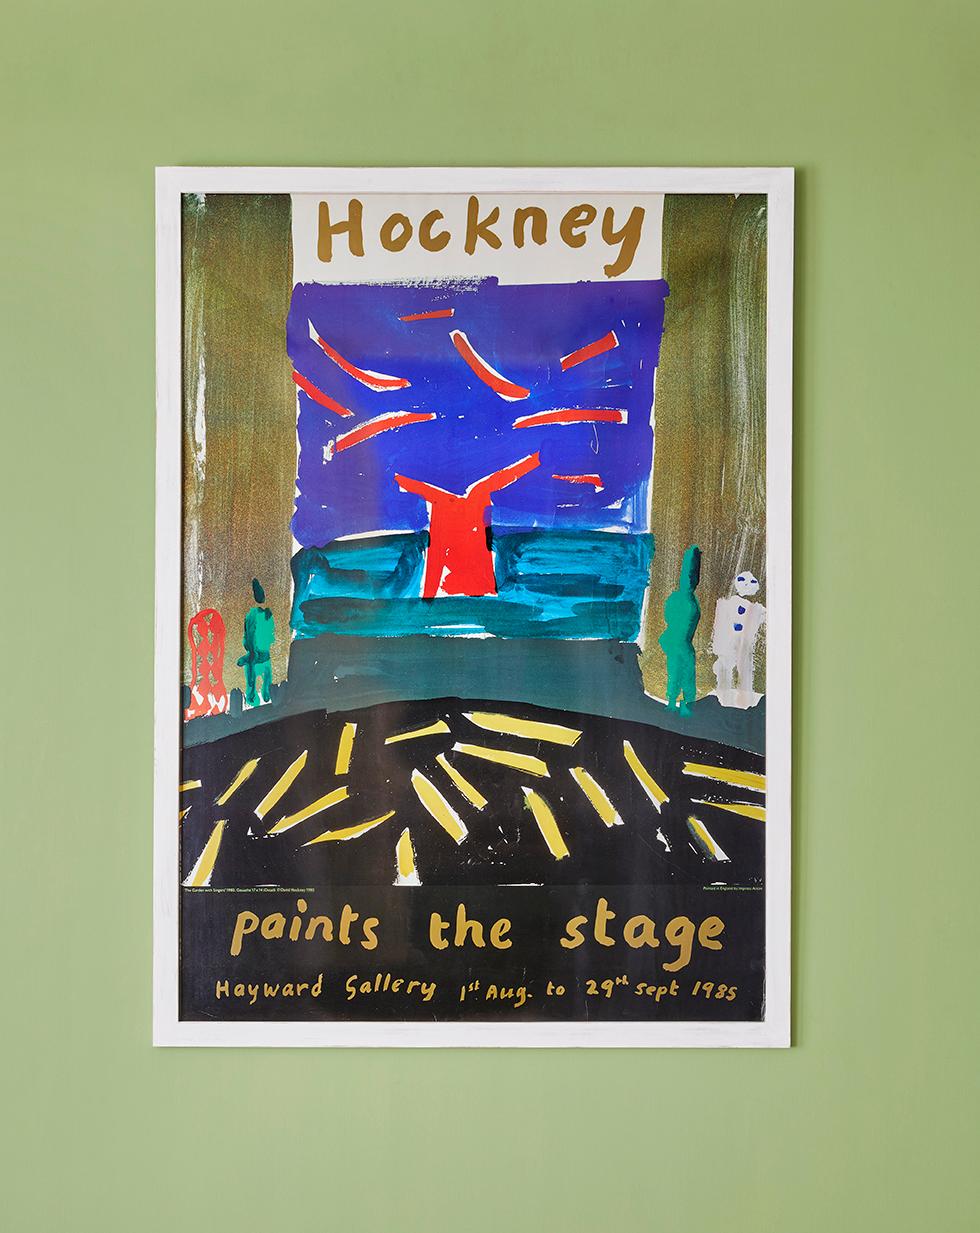 After David Hockney
United Kingdom, 1985

Large vintage exhibition poster in frame.

This poster was created for the important Hockney Paints the Stage exhibition at the Hayward Gallery, London in 1985.

Size: H 150 x W 110 cm.